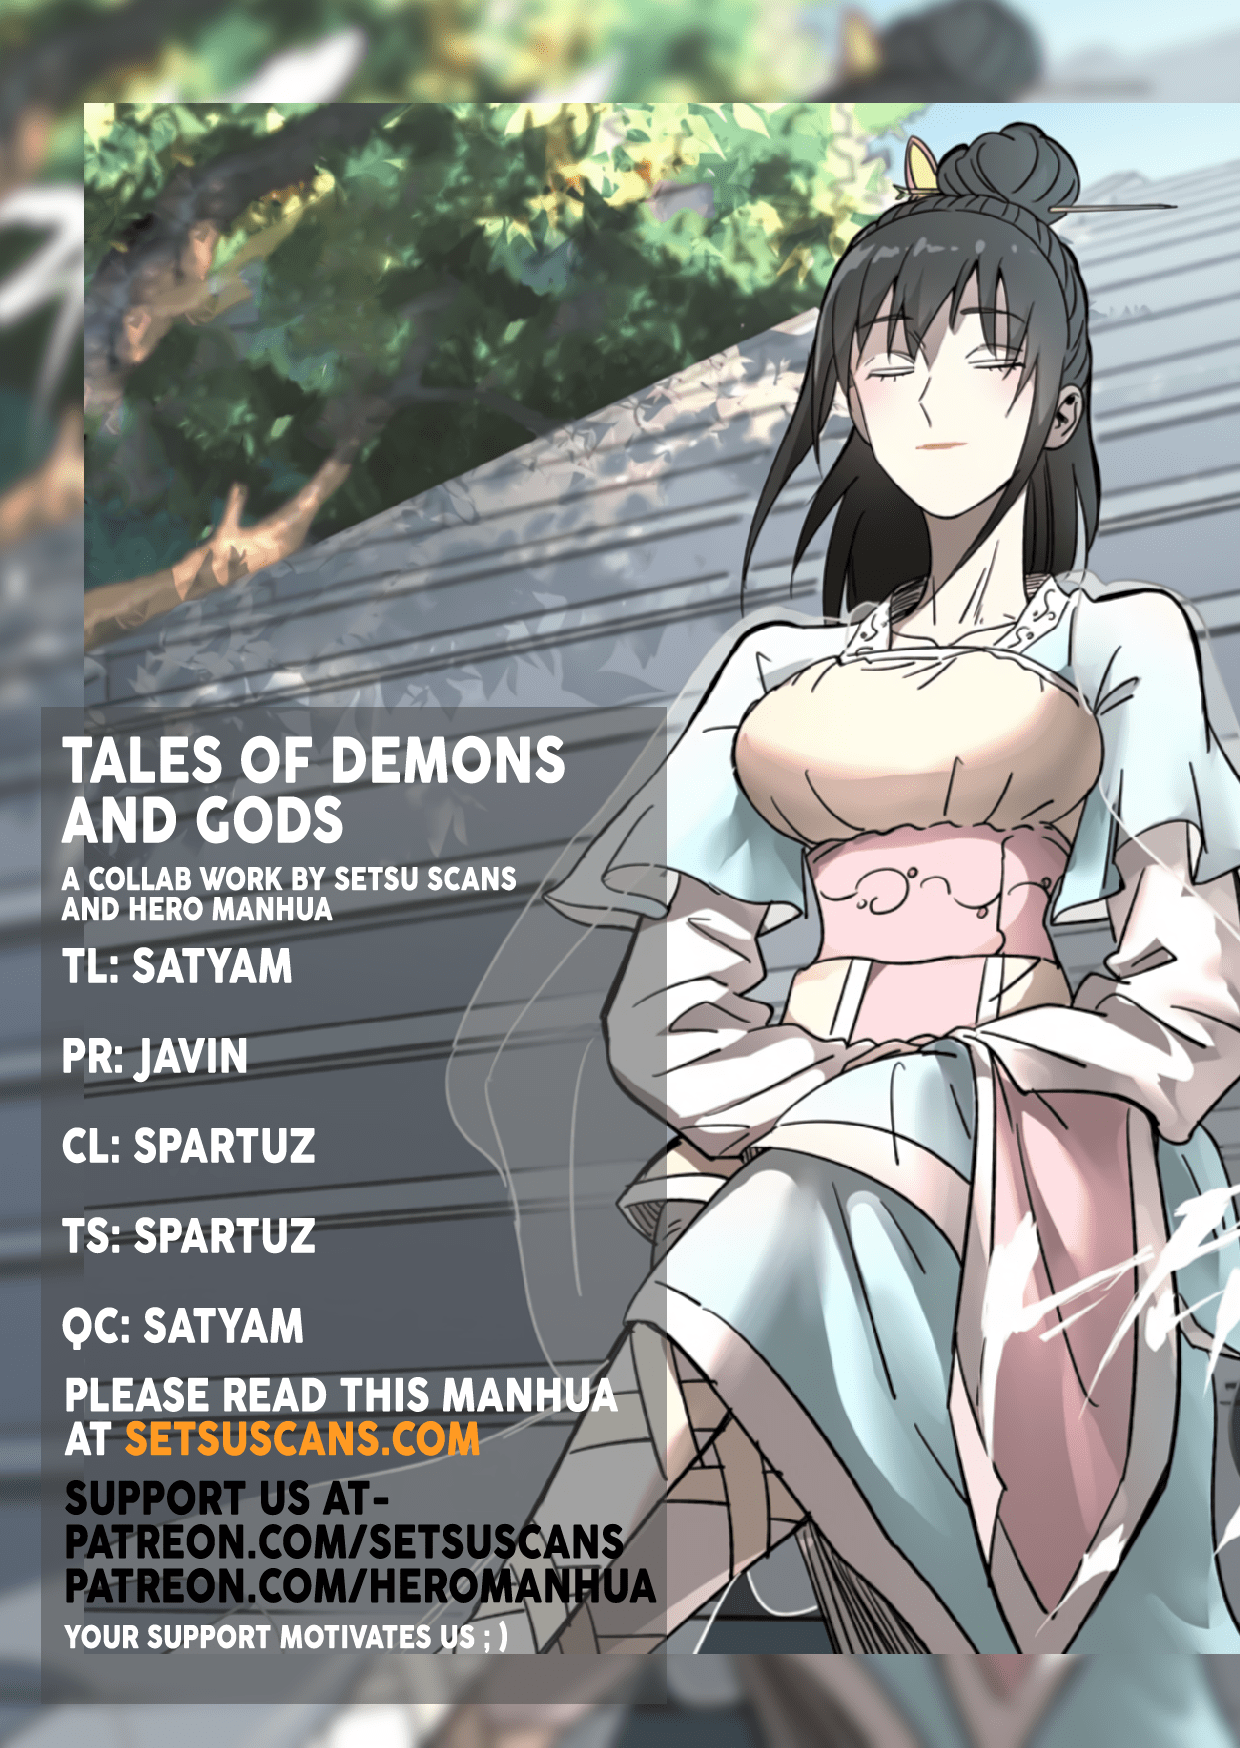 Tales of Demons and Gods - Chapter 10721 - The exchange will continue (2) - Image 1